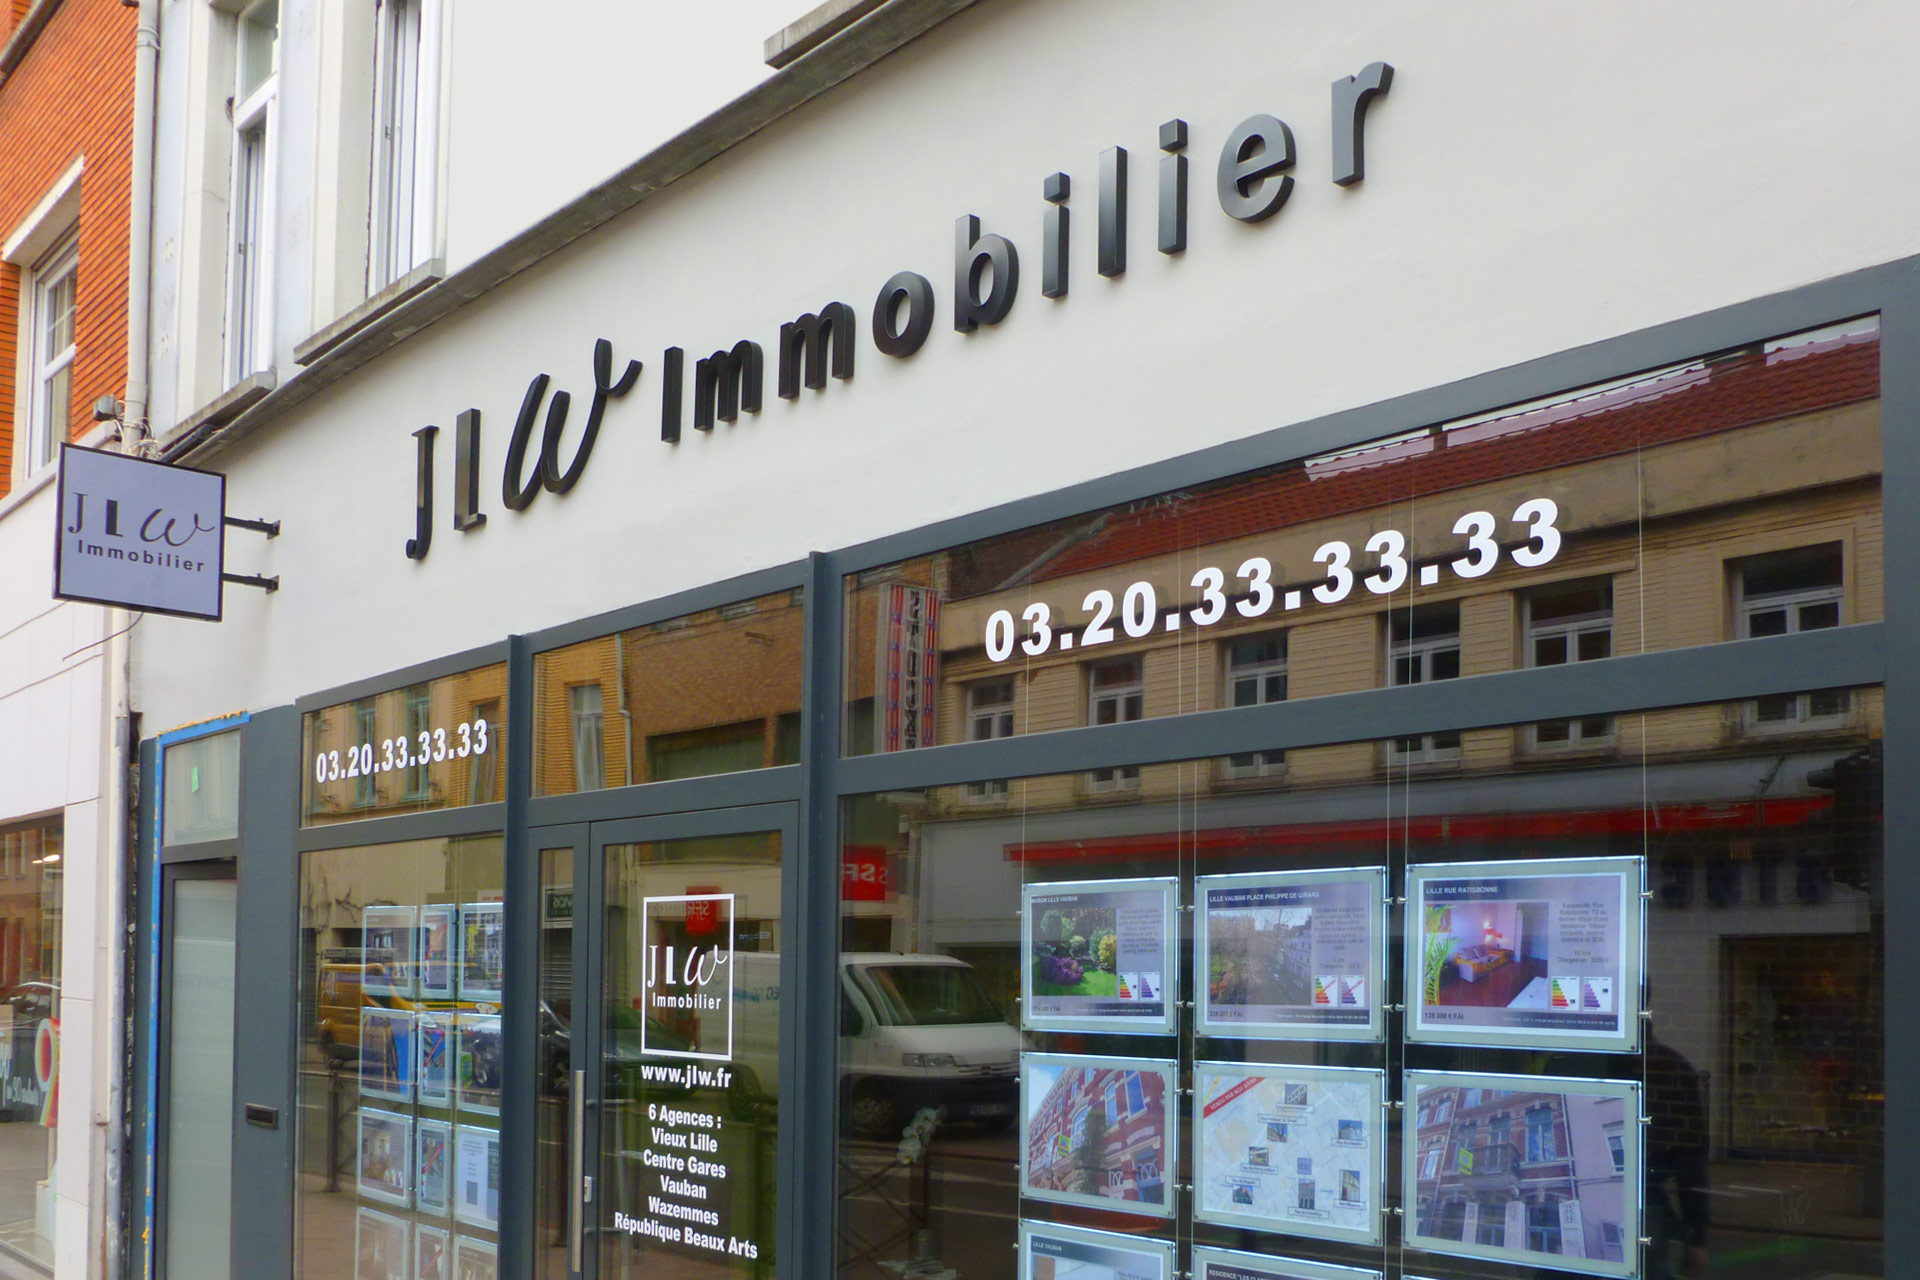 JLW immobilier – LILLE